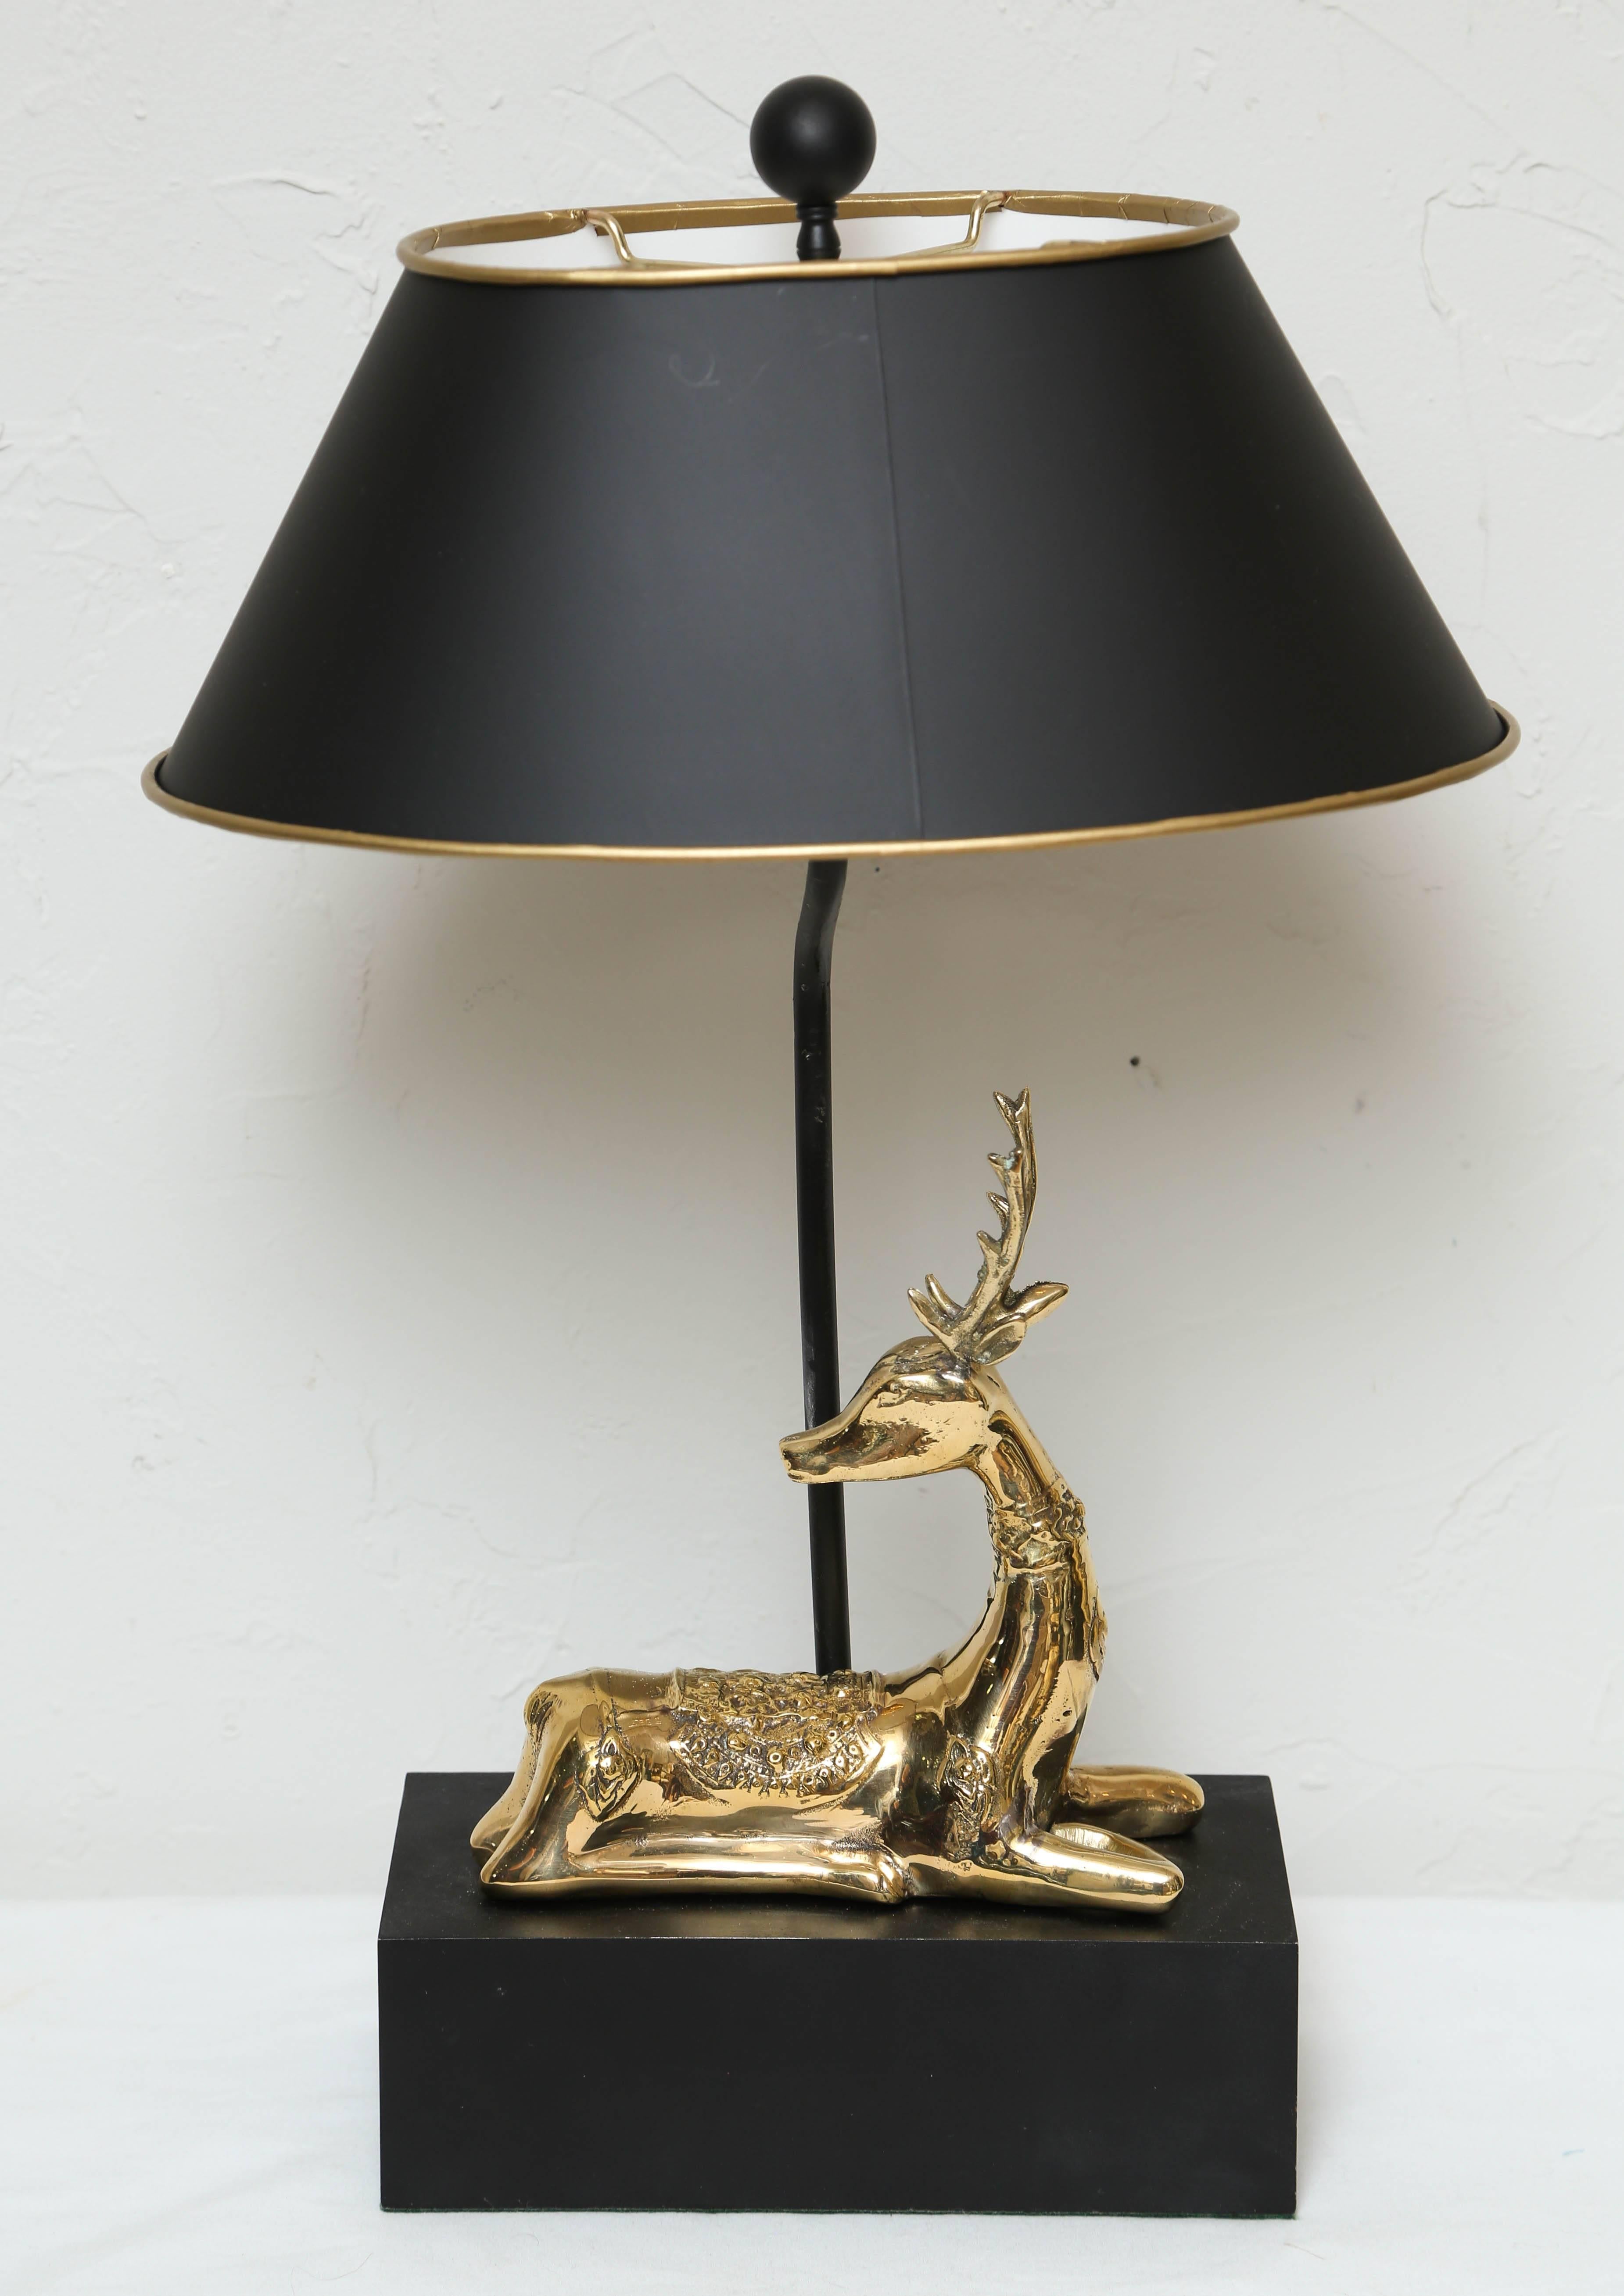 Reclining brass stag on black wood base with new oval shade.